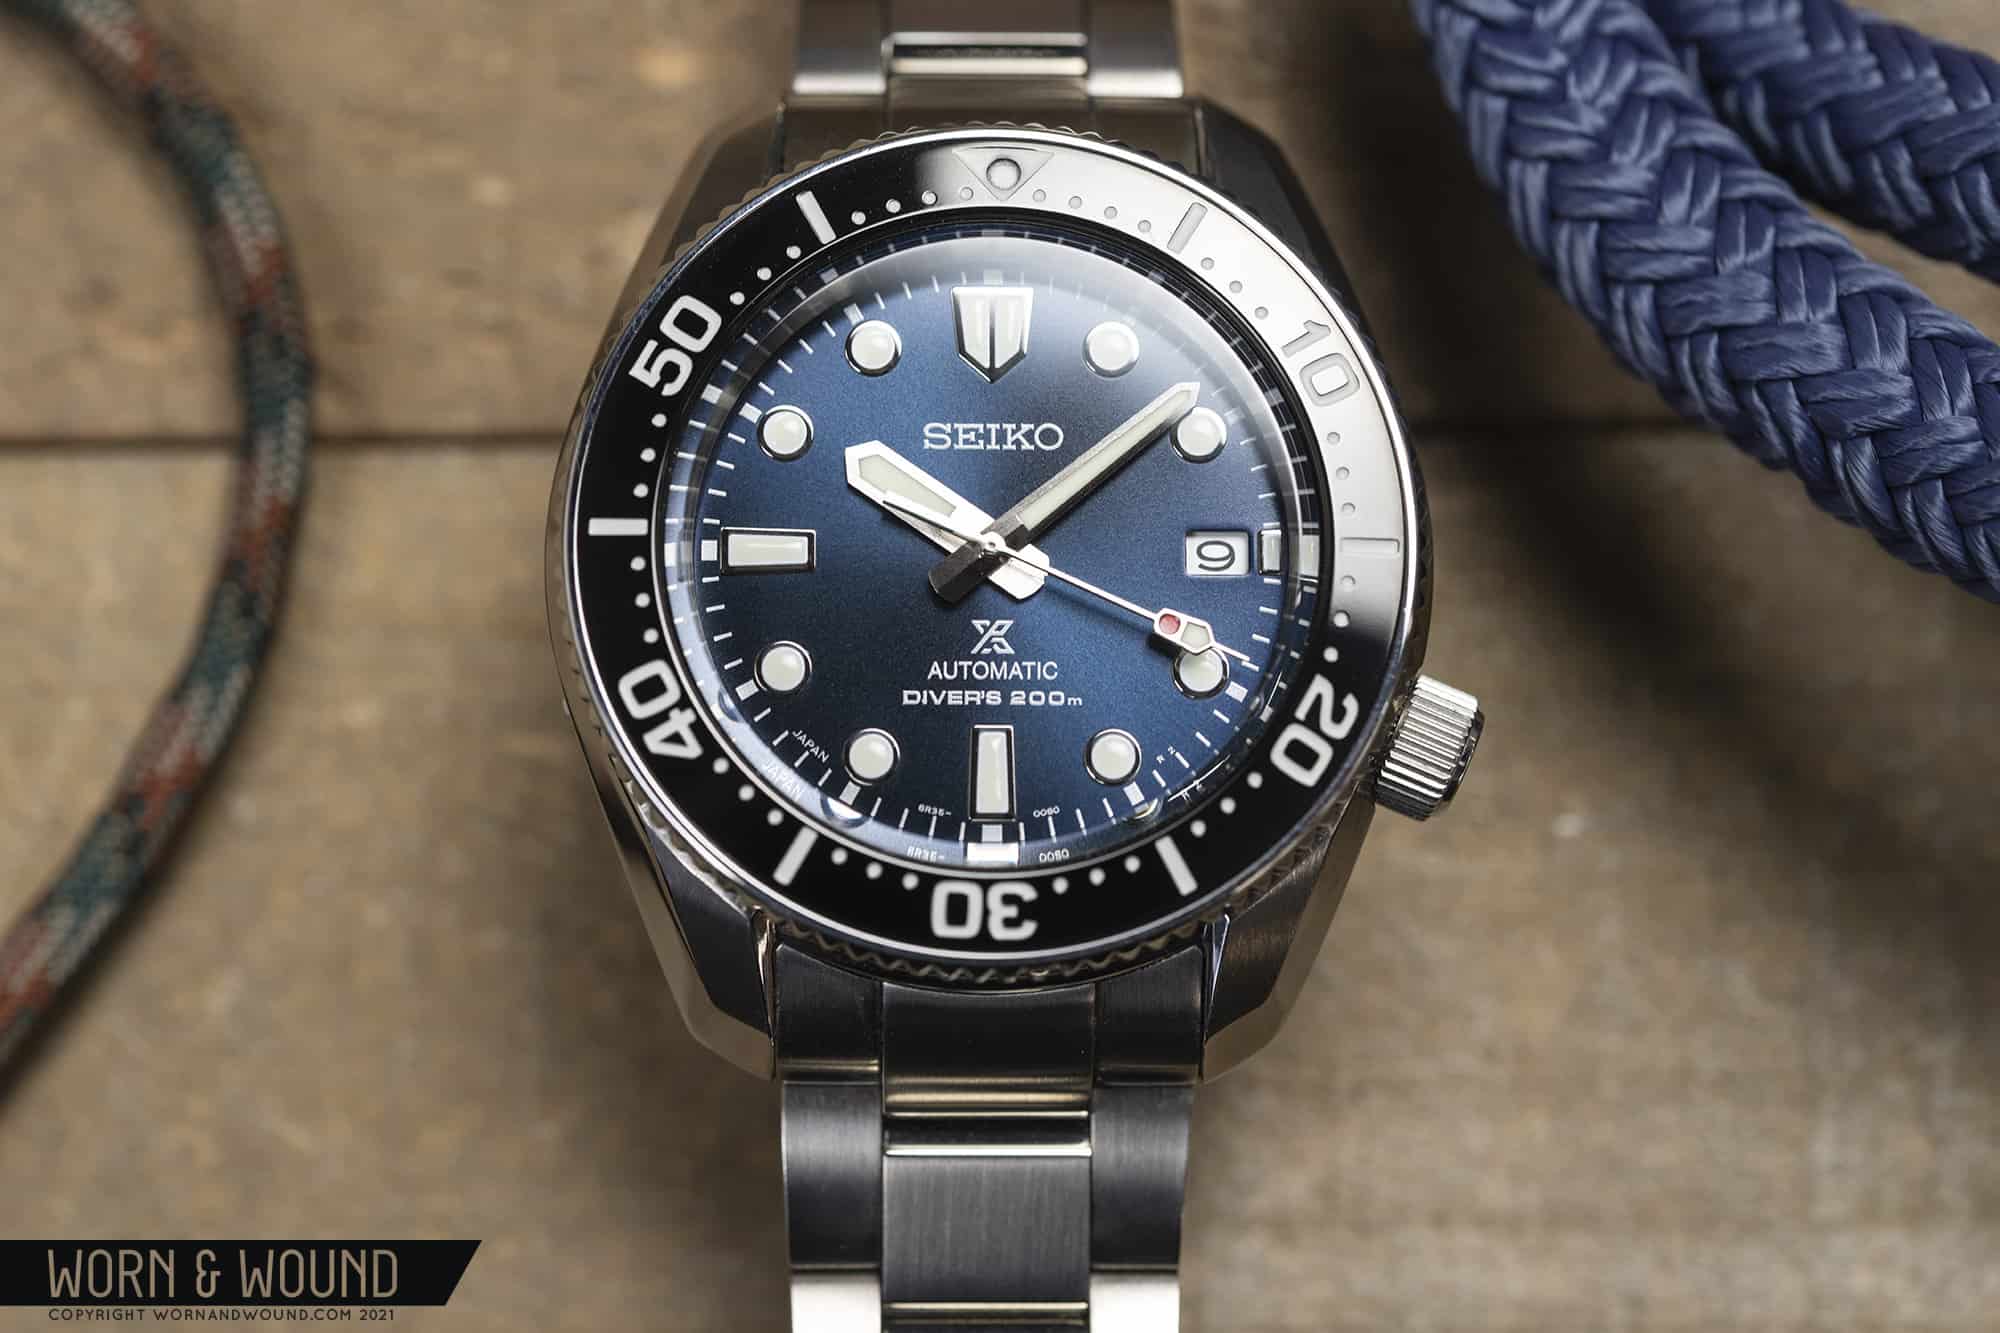 Hands-On With The Seiko Prospex SPB187